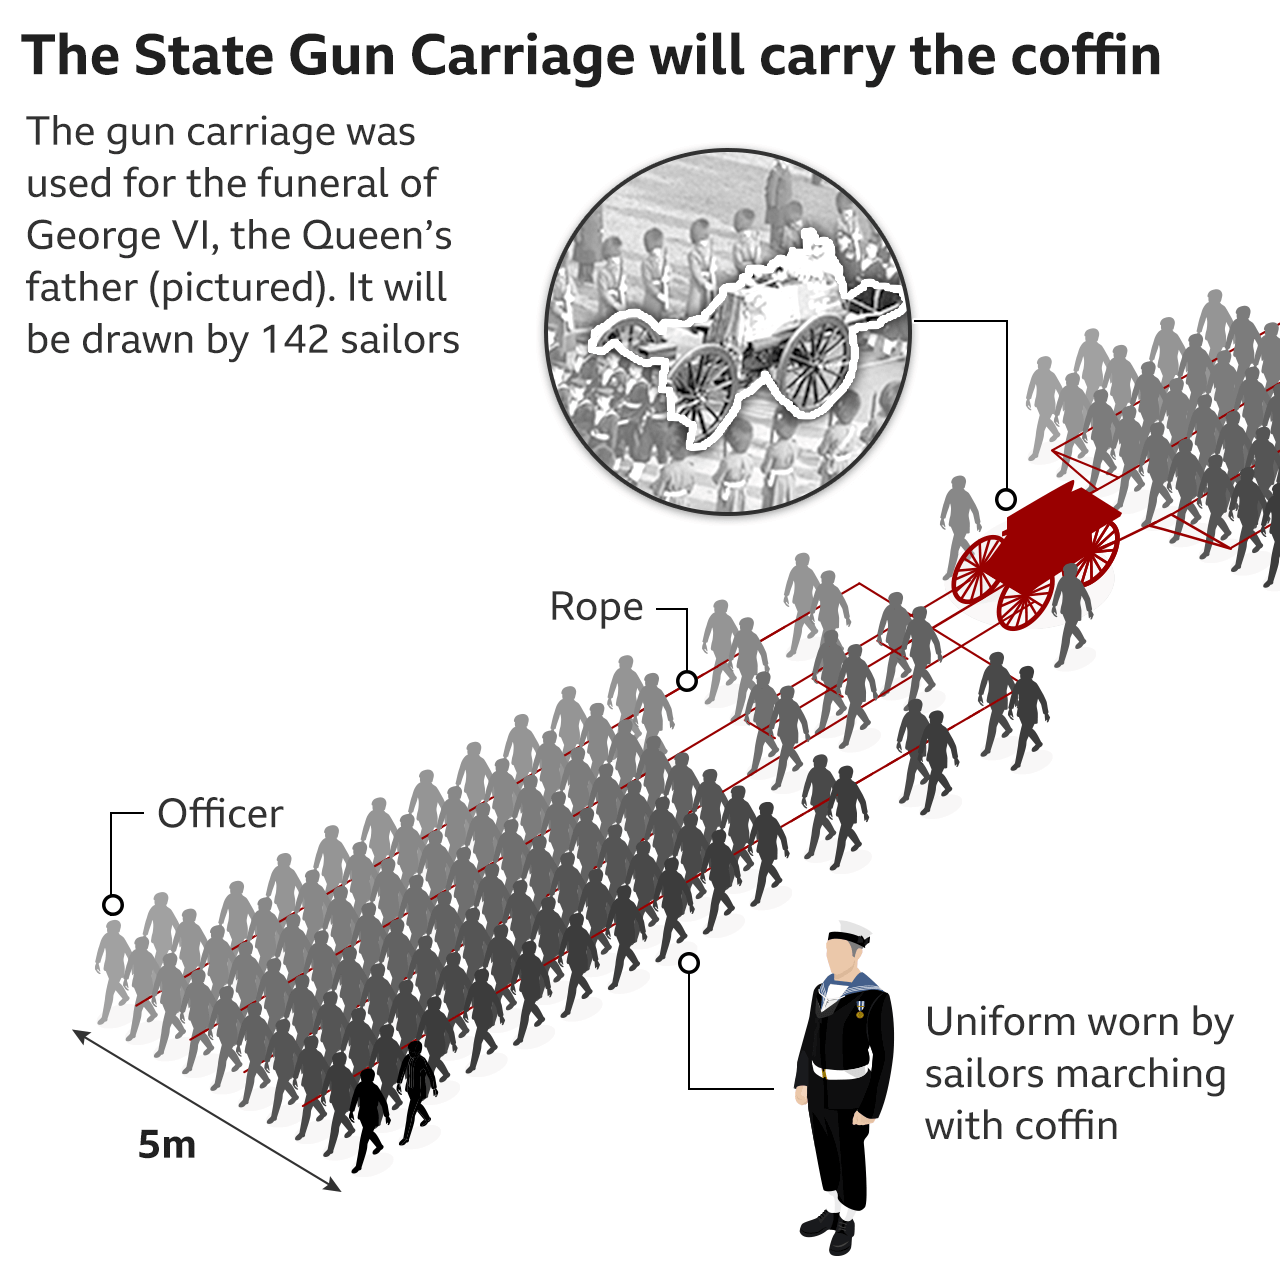 Infographic showing the State Gun Carriage pulled by 142 sailors from the Royal Navy